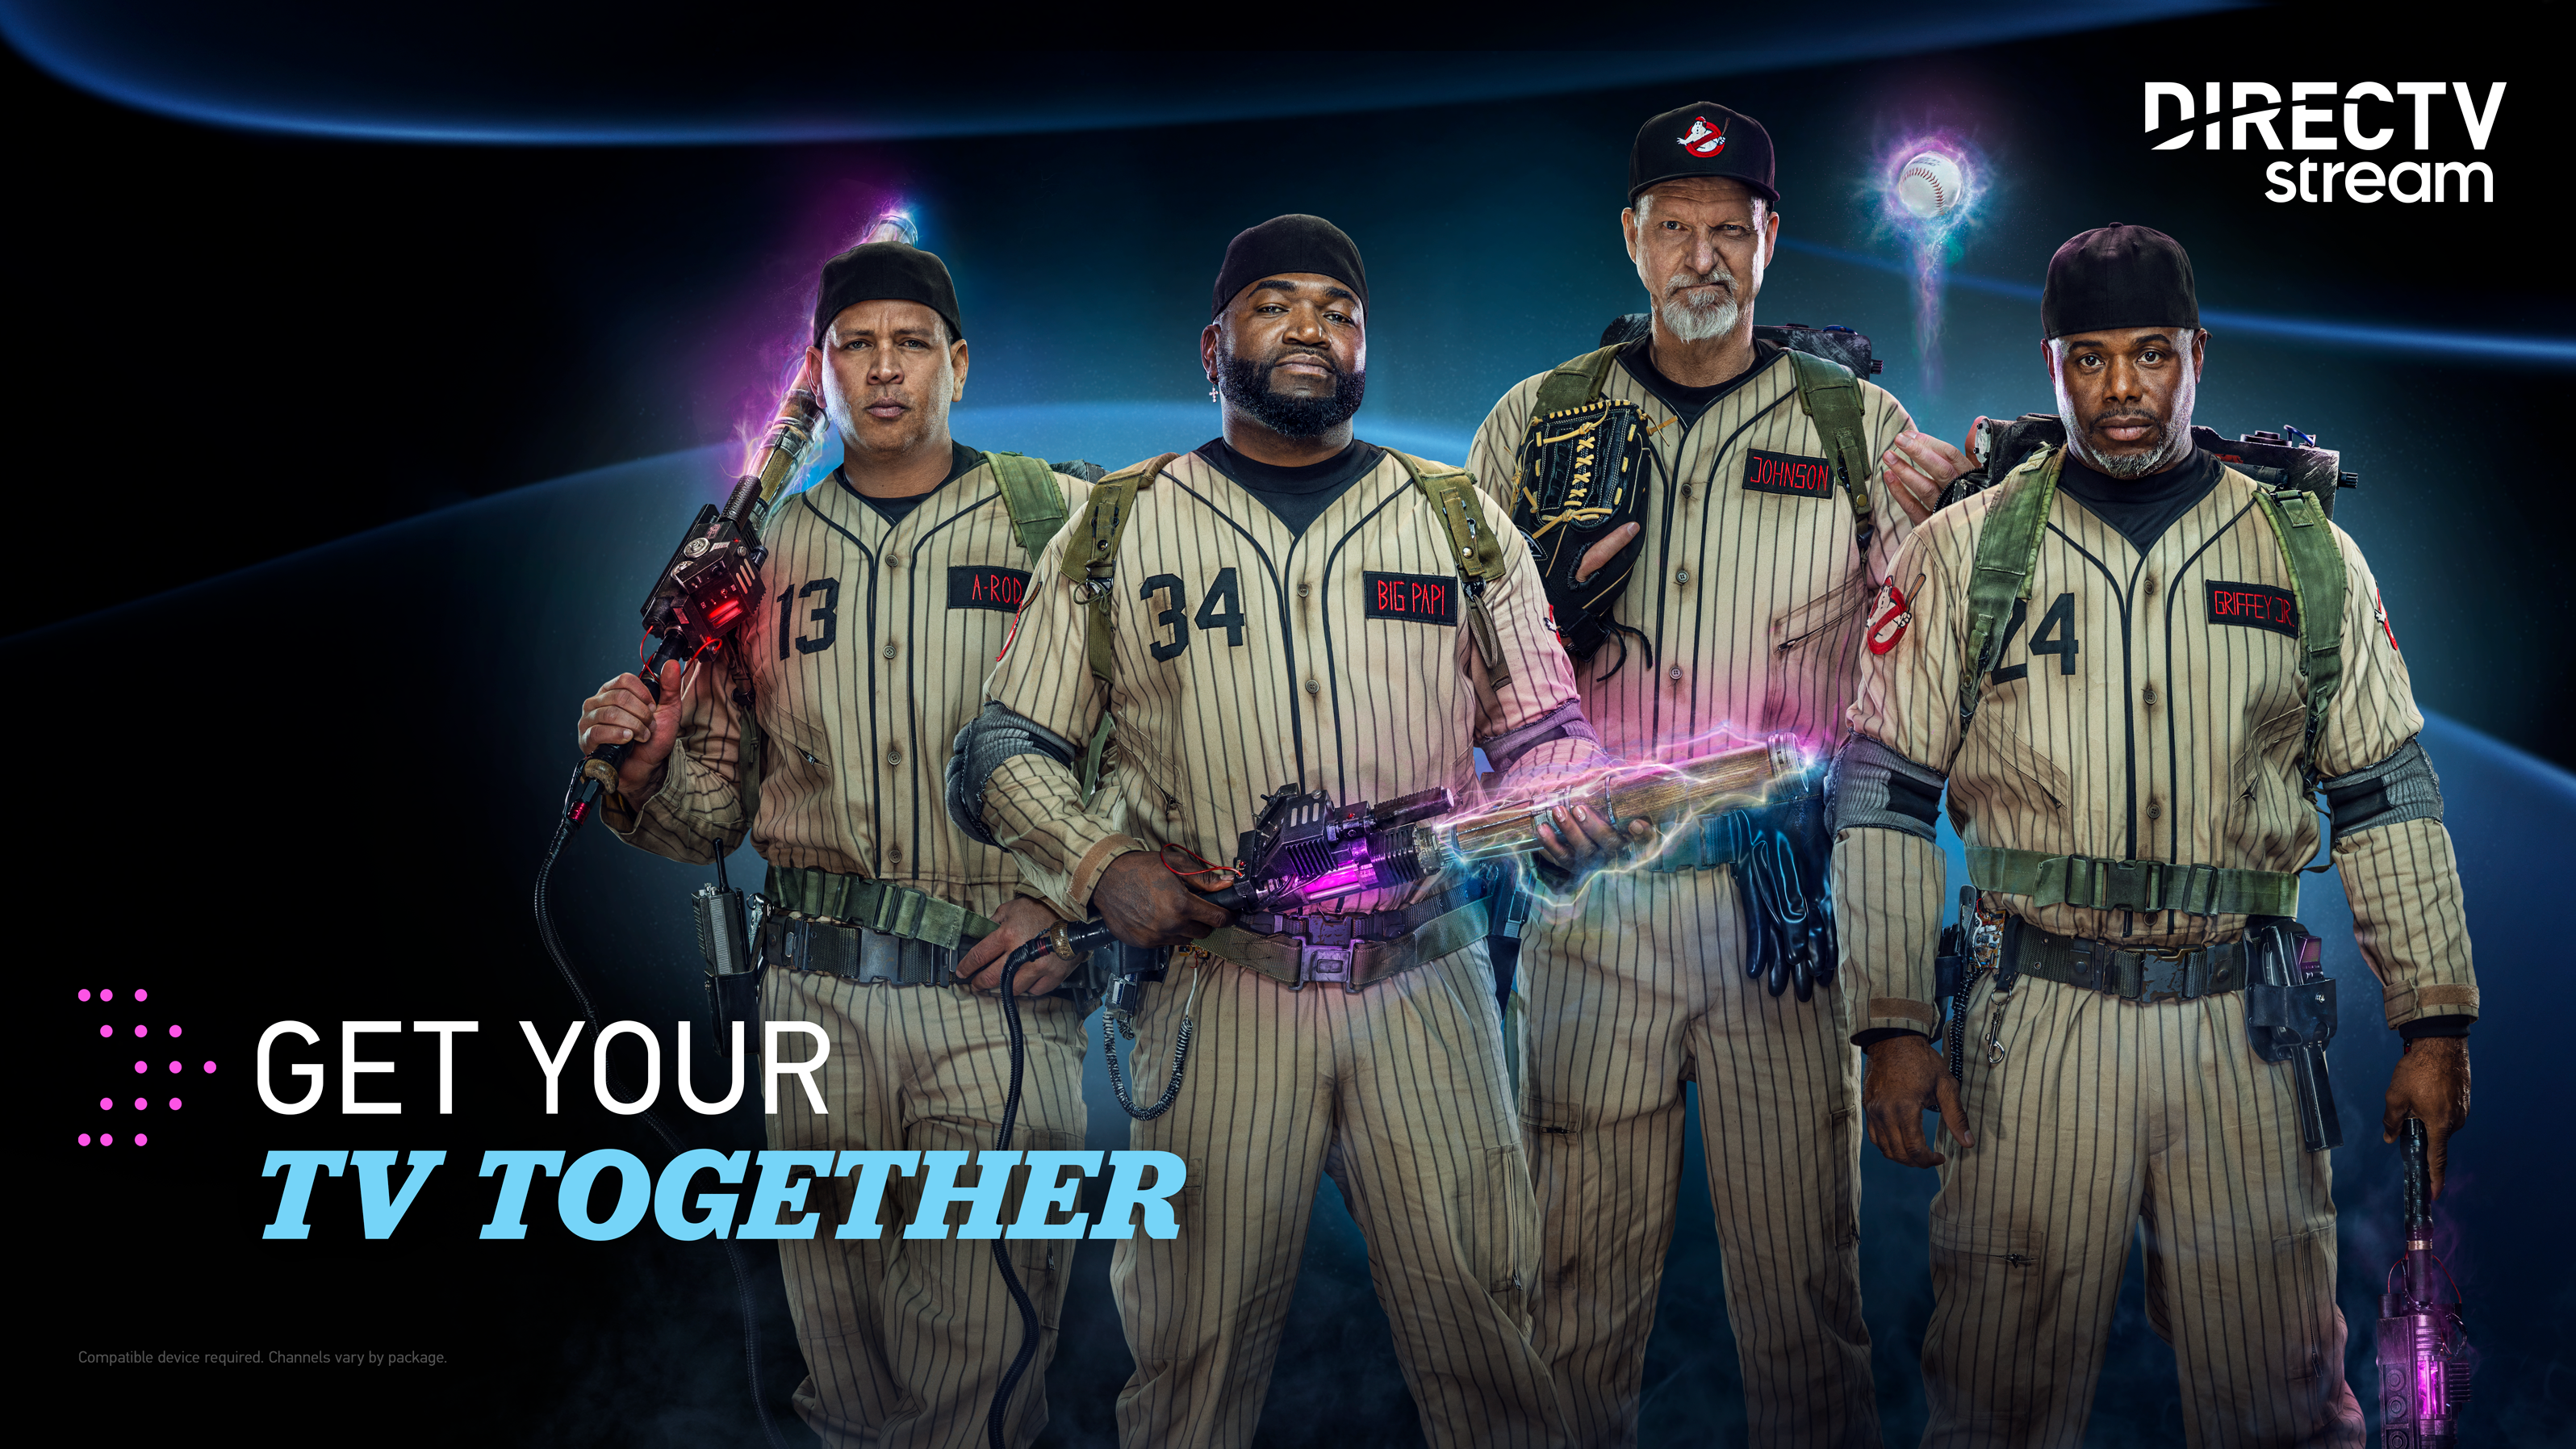 In New Spots, DirecTV Stream Calls on MLB Stars for Ghostbusters Style Pitch Next TV